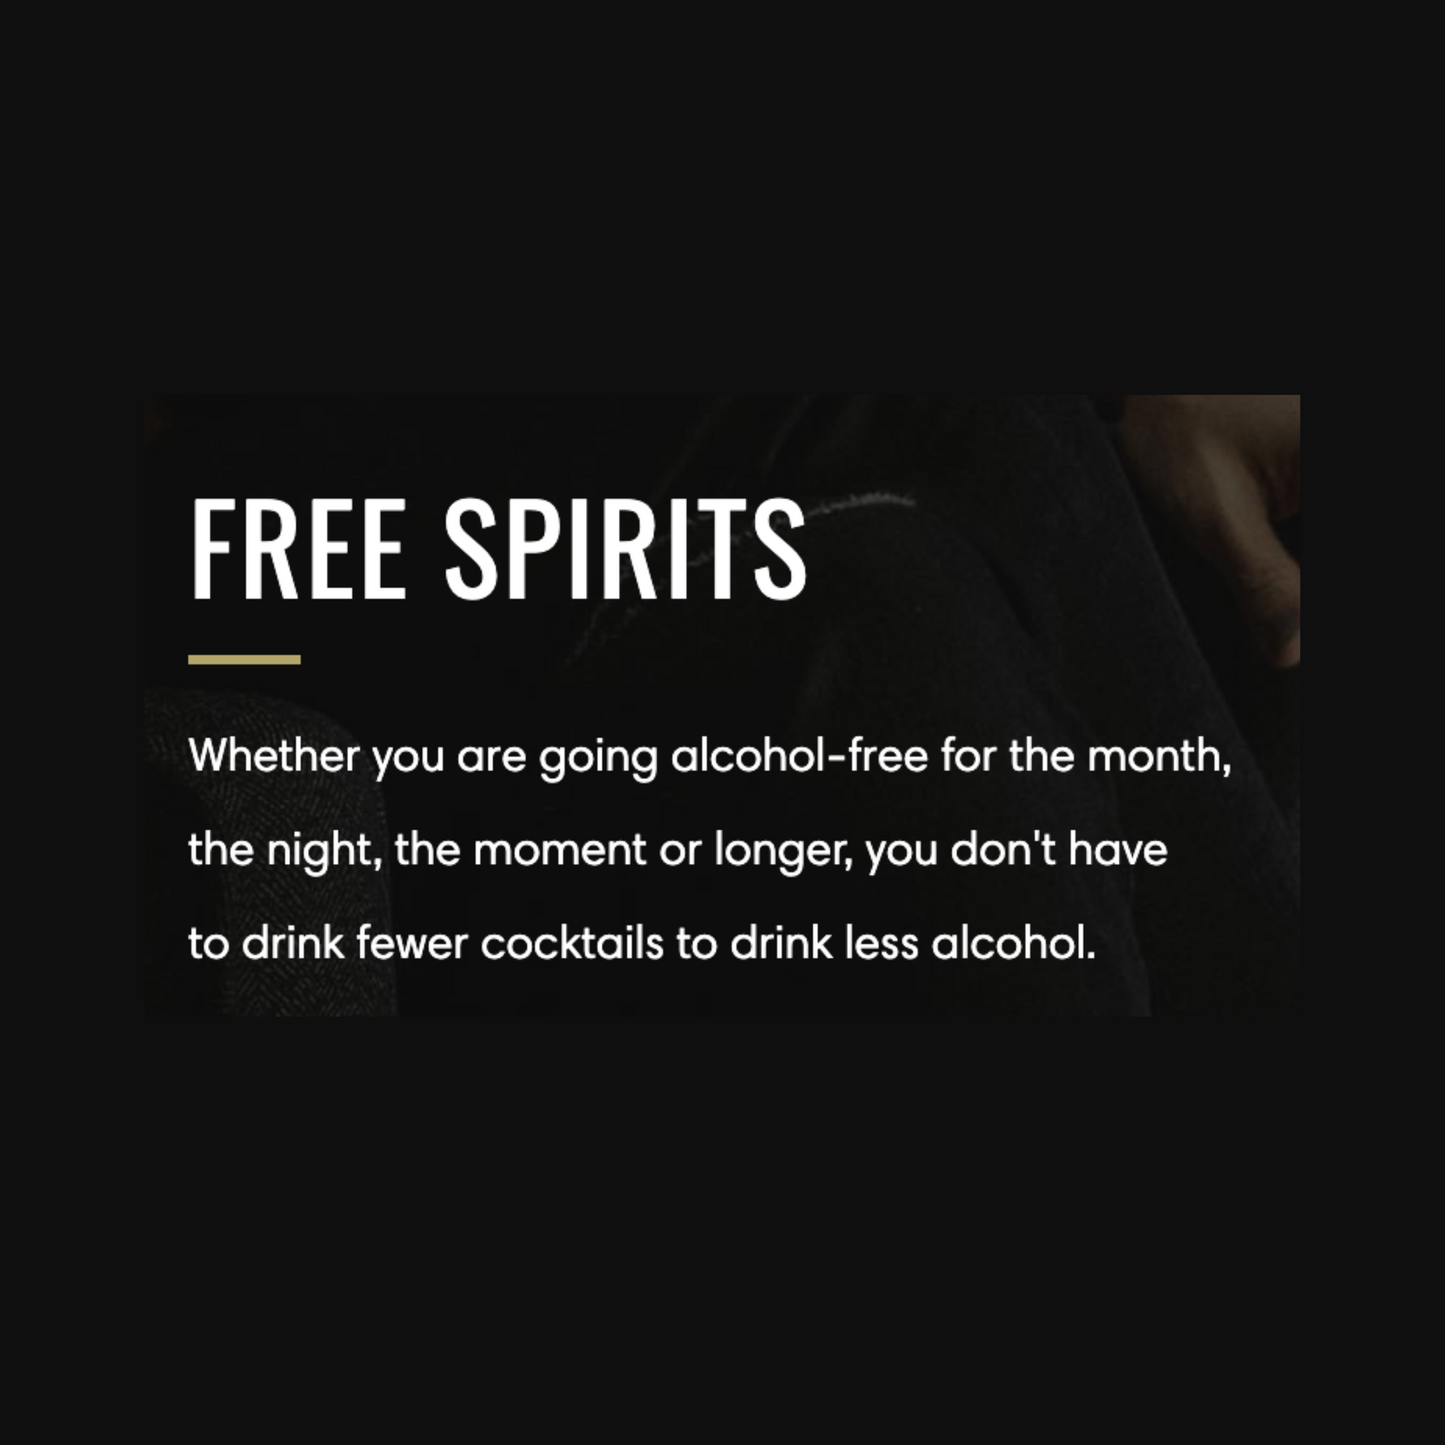 The Negroni Bundle by The Free Spirits Company